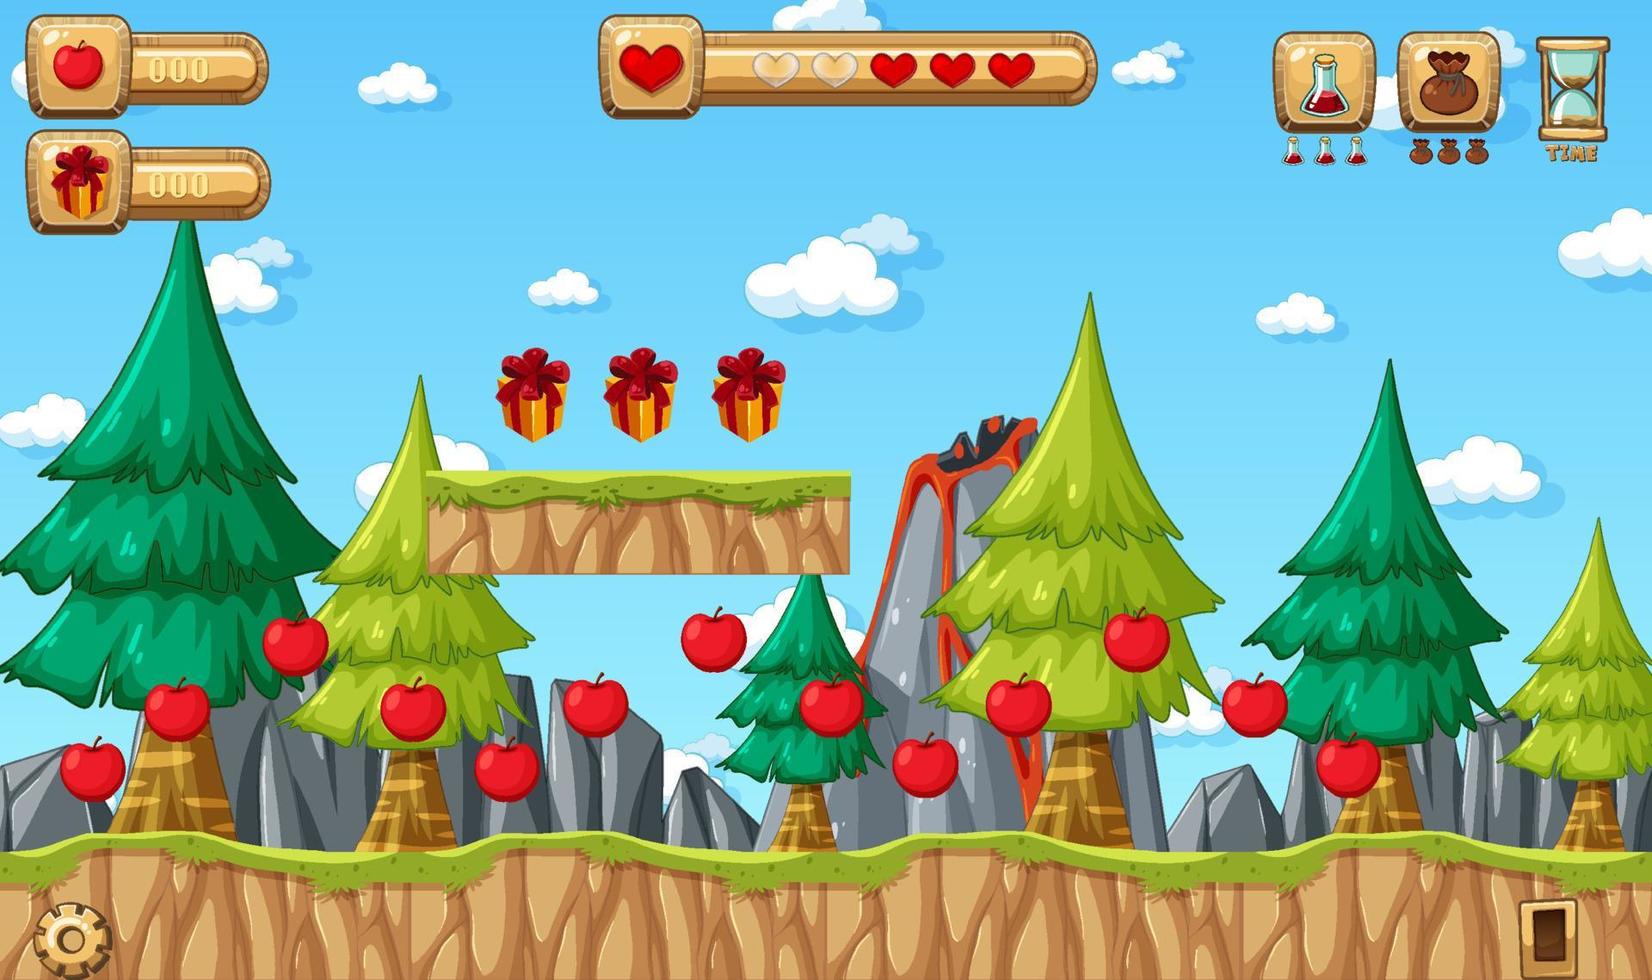 Collecting Apples Platformer Game Template vector